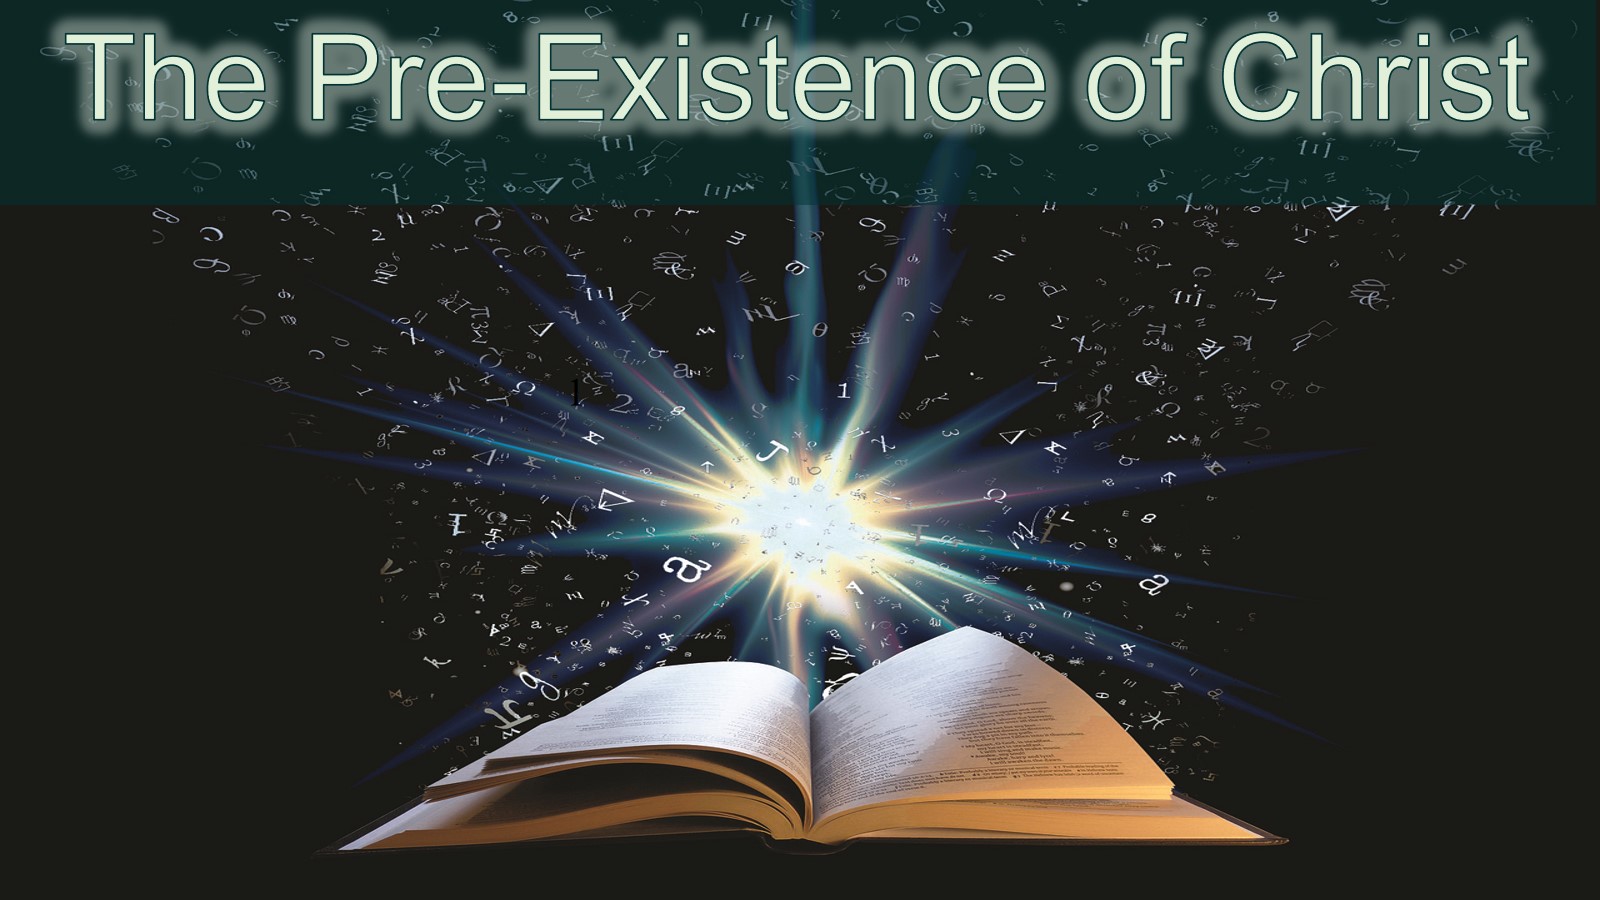 The Pre-Existence of Christ